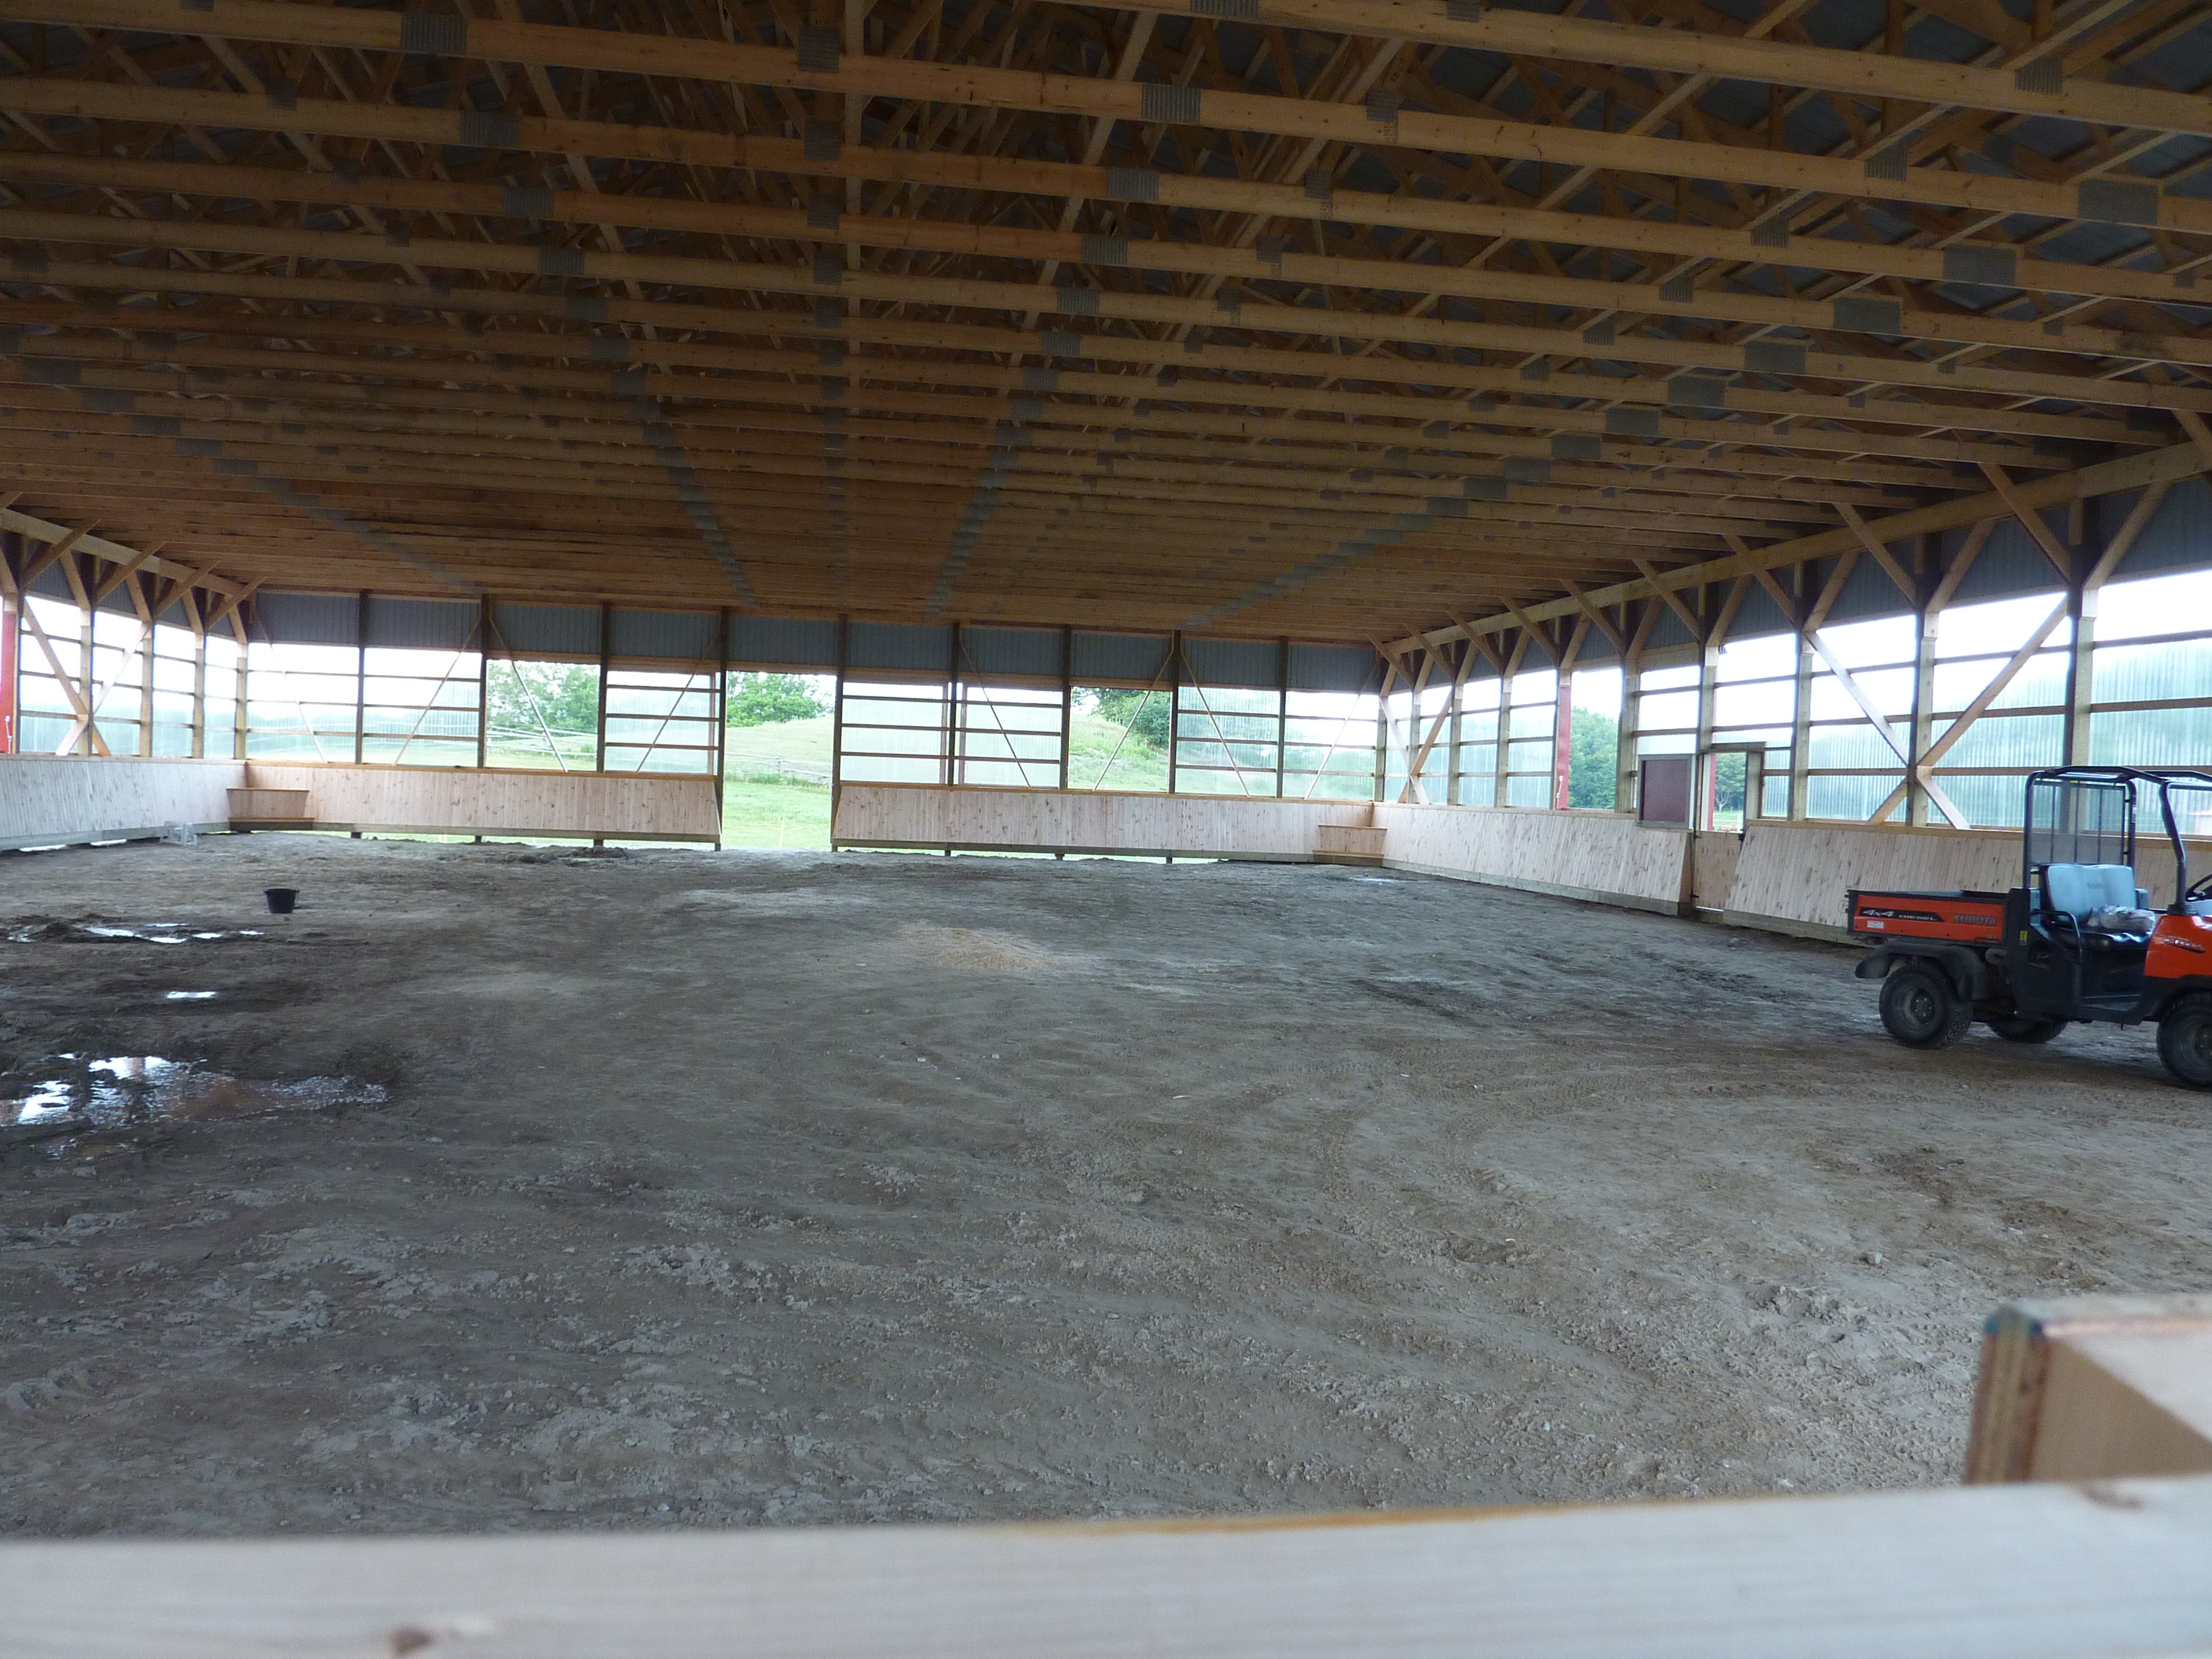 Once inside, the enormity of the arena's dimensions (80 x 120) becomes more apparent. It's important to note, ceiling lights and the final layers of footing have not yet been installed.